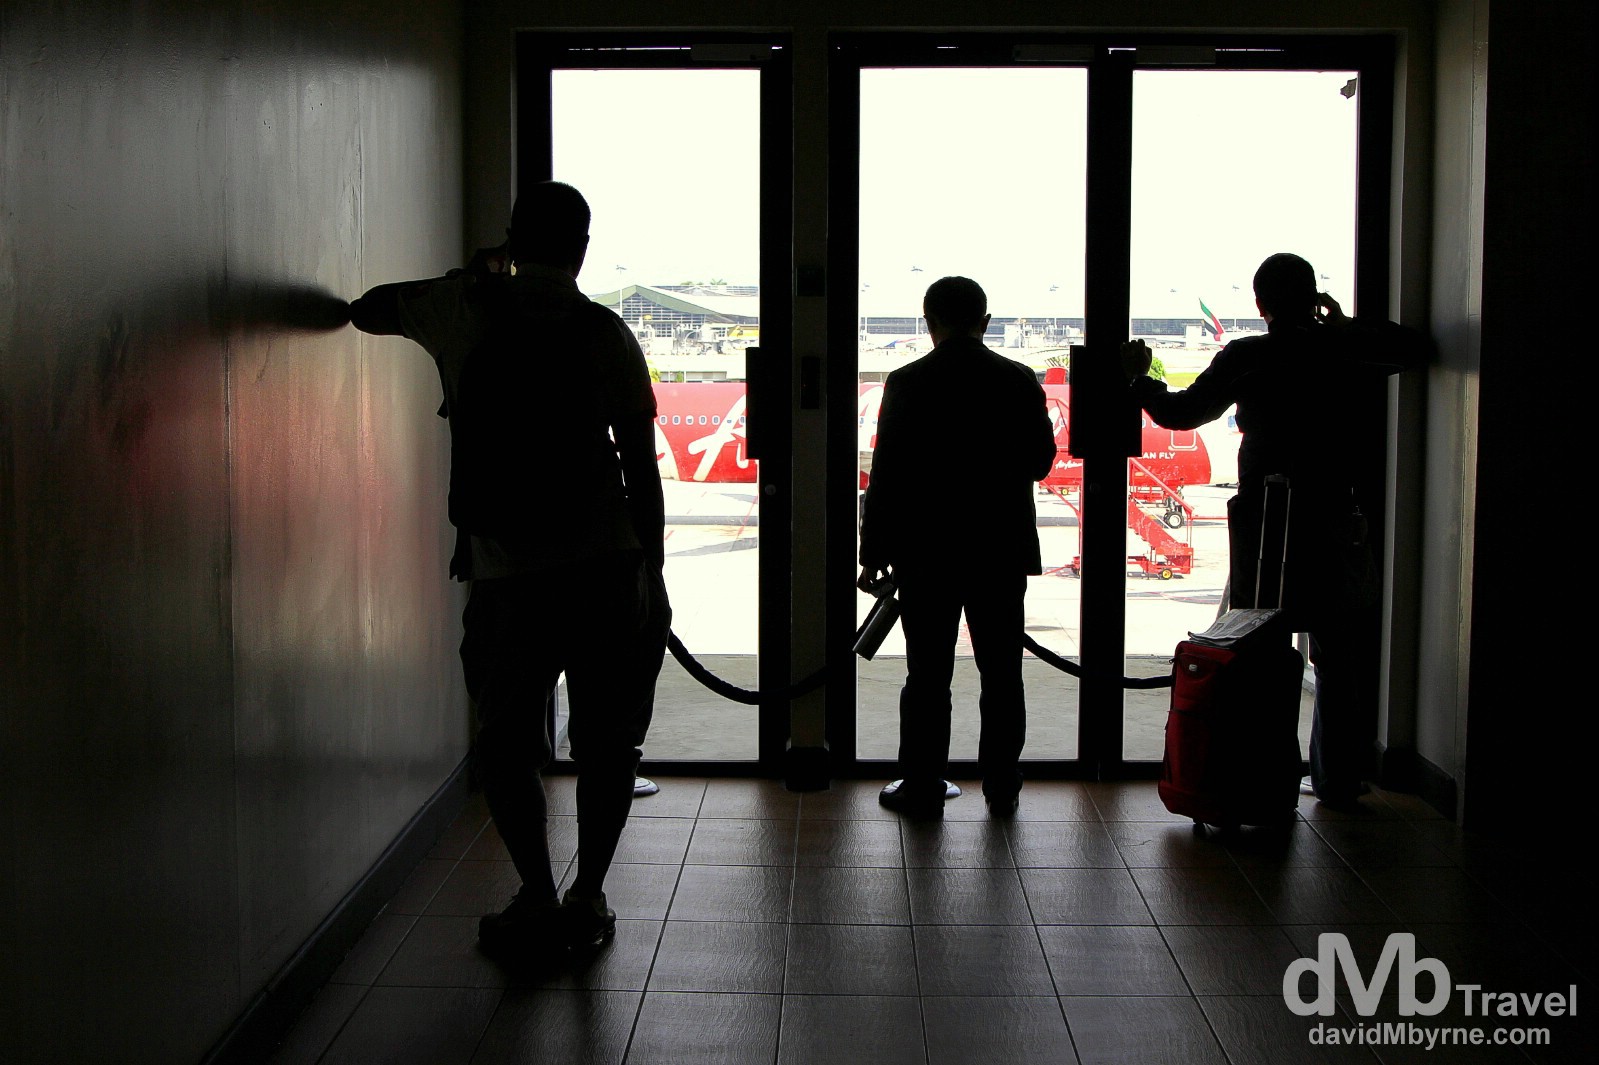 Silhouettes of transit travellers looking out onto the tarmac from the departures terminal of Kuala Lumpur International Airport, Kuala Lumpur, Malaysia. March 6th 2012.